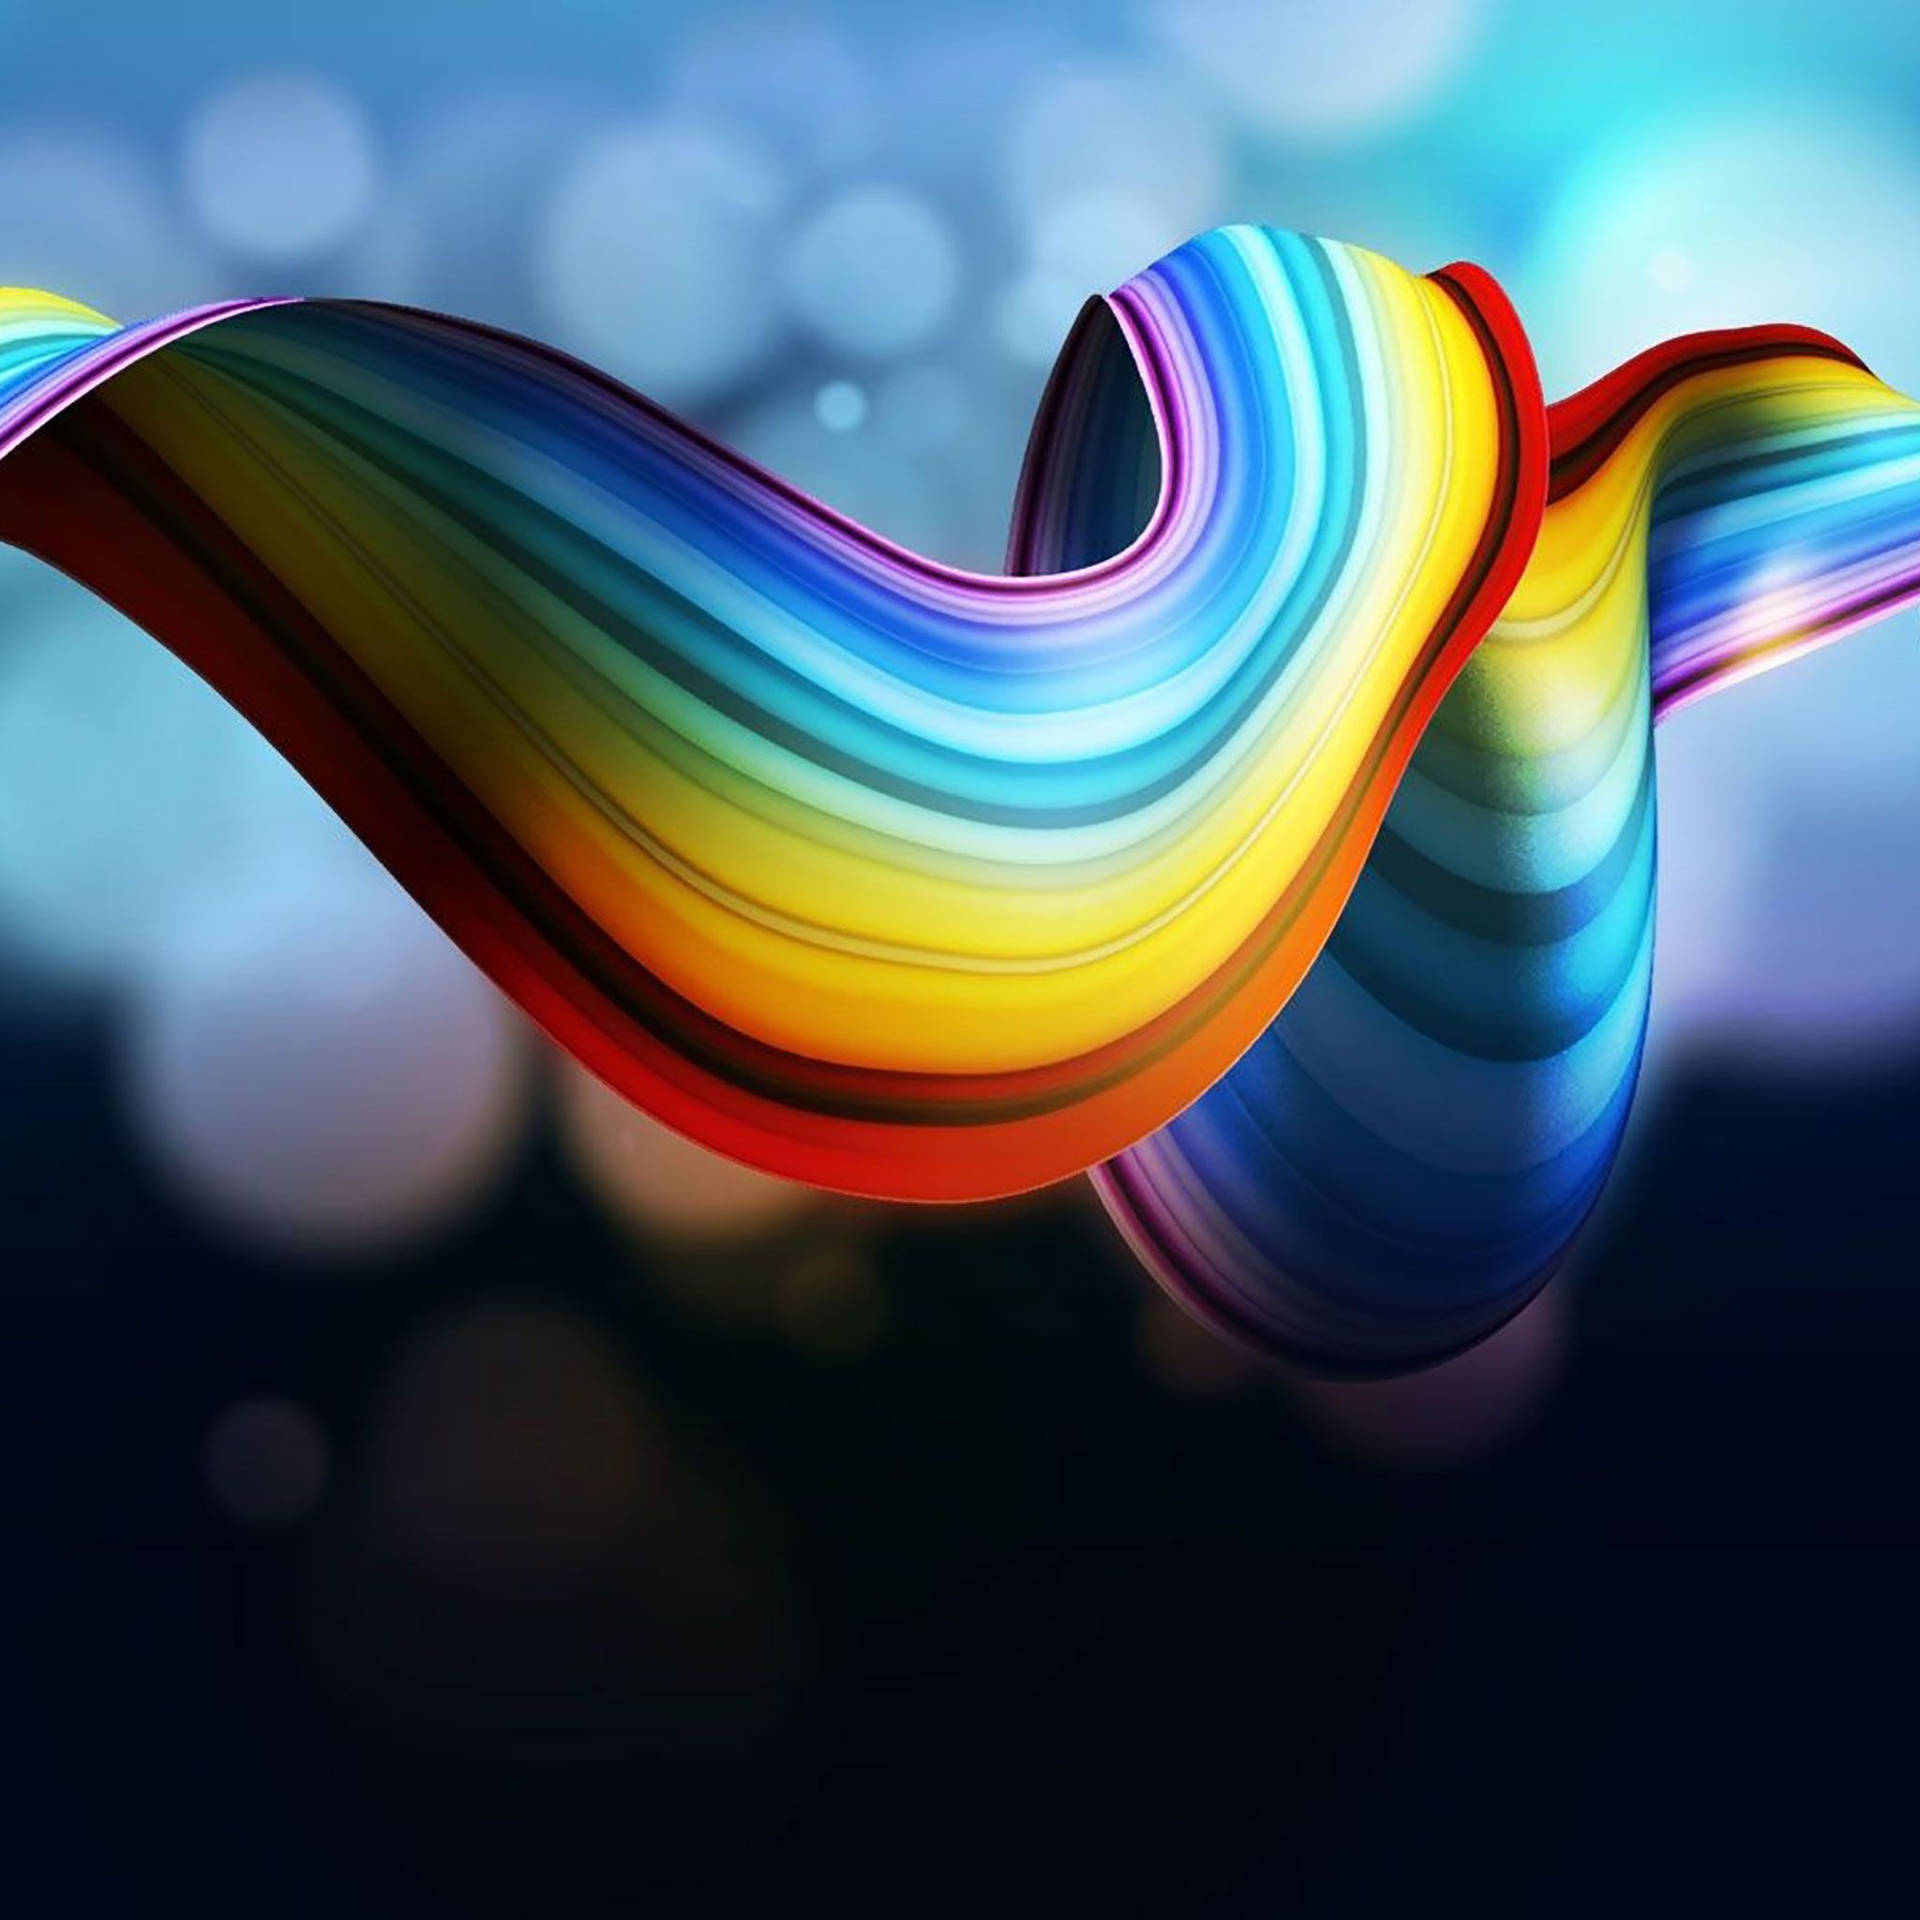 Rainbow Aesthetic Abstract Wave Wallpaper